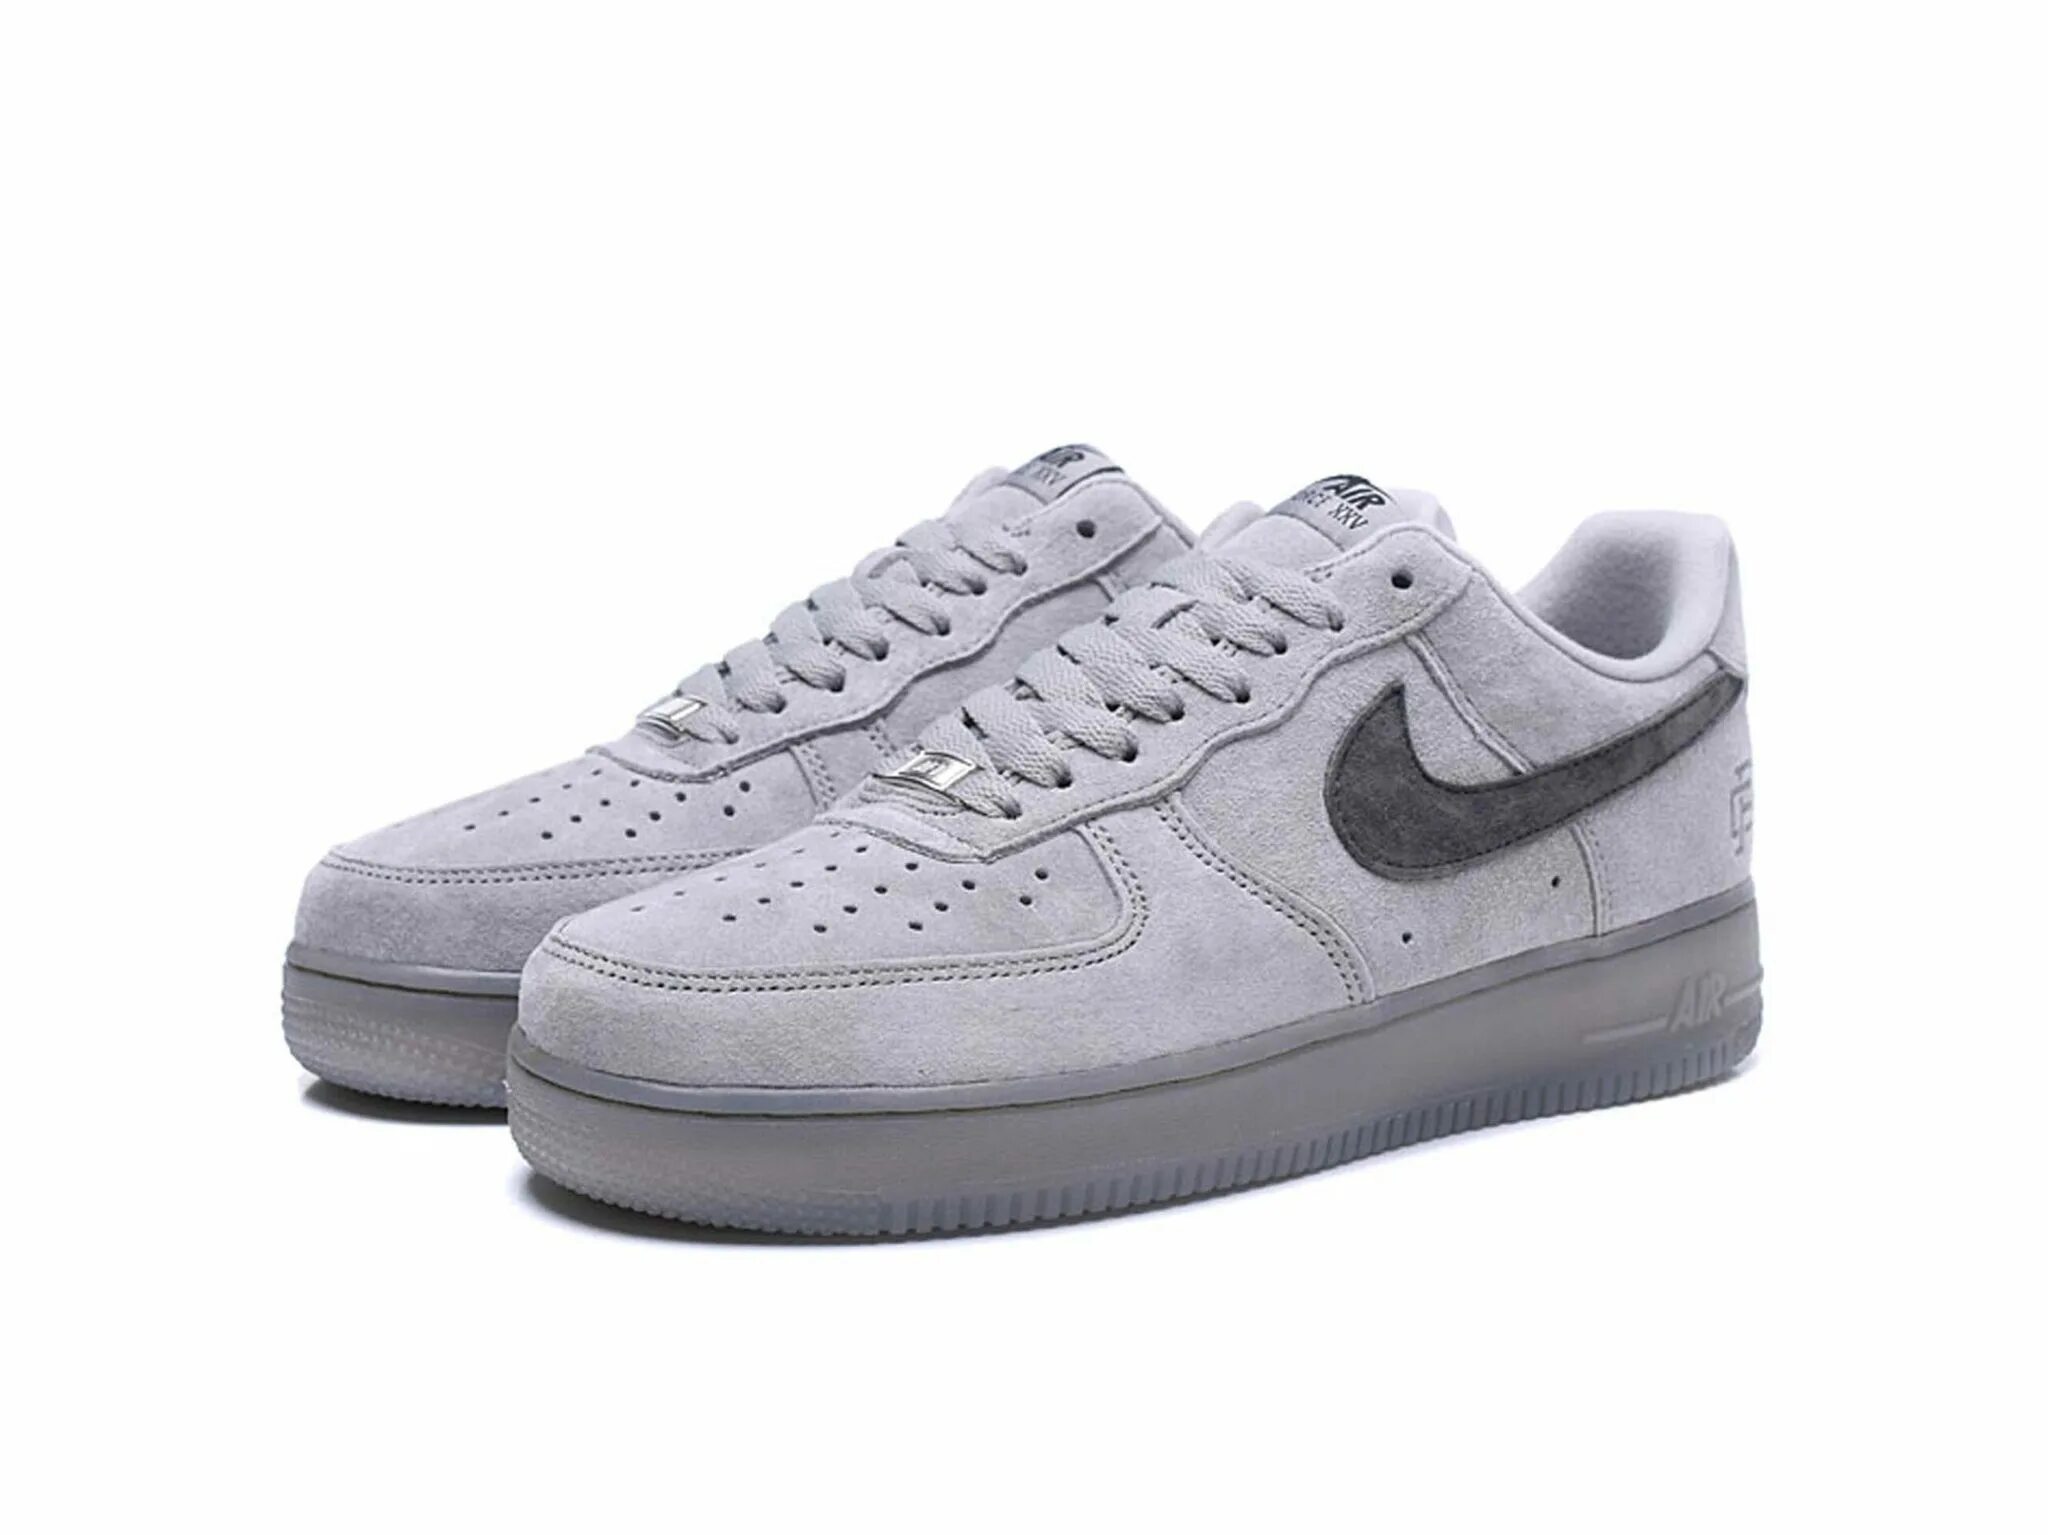 Nike Air Force 1 Low Grey x reigning Champ. Nike Air Force 1 Low Grey. Nike Air Force 1 Low reigning Champ. Nike Air Force 1 Low reigning Champ Grey. Кроссовки найк air force